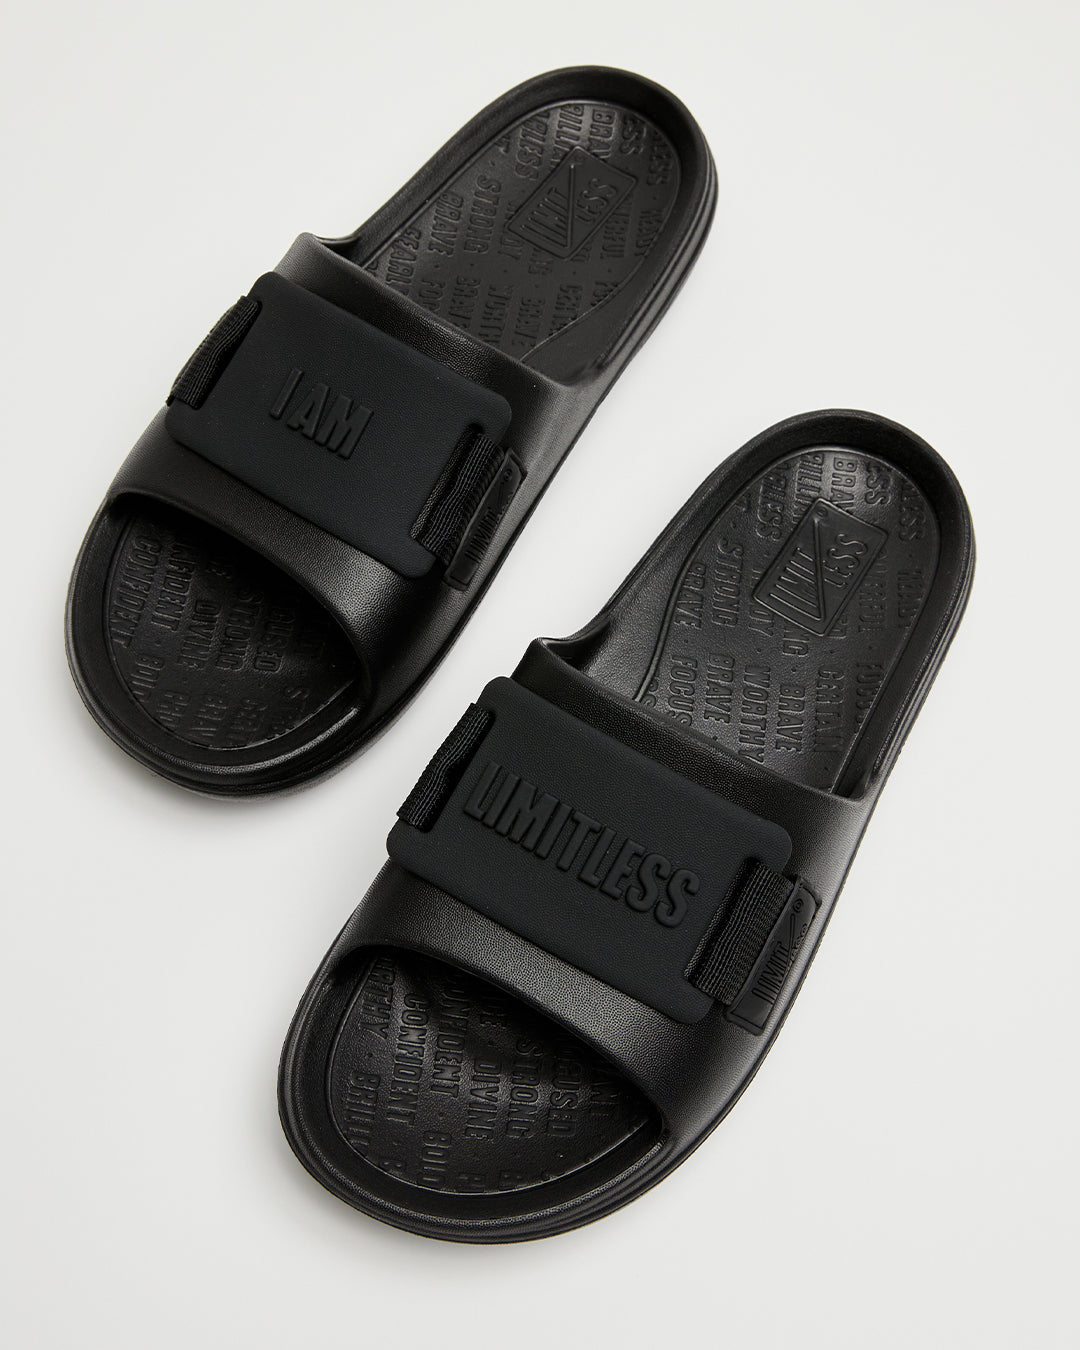 LIMITLESS SLIDES™ WITH ESSENTIAL TIBAH™ QUAD - CHOCTAW HIGH SCHOOL EDITION